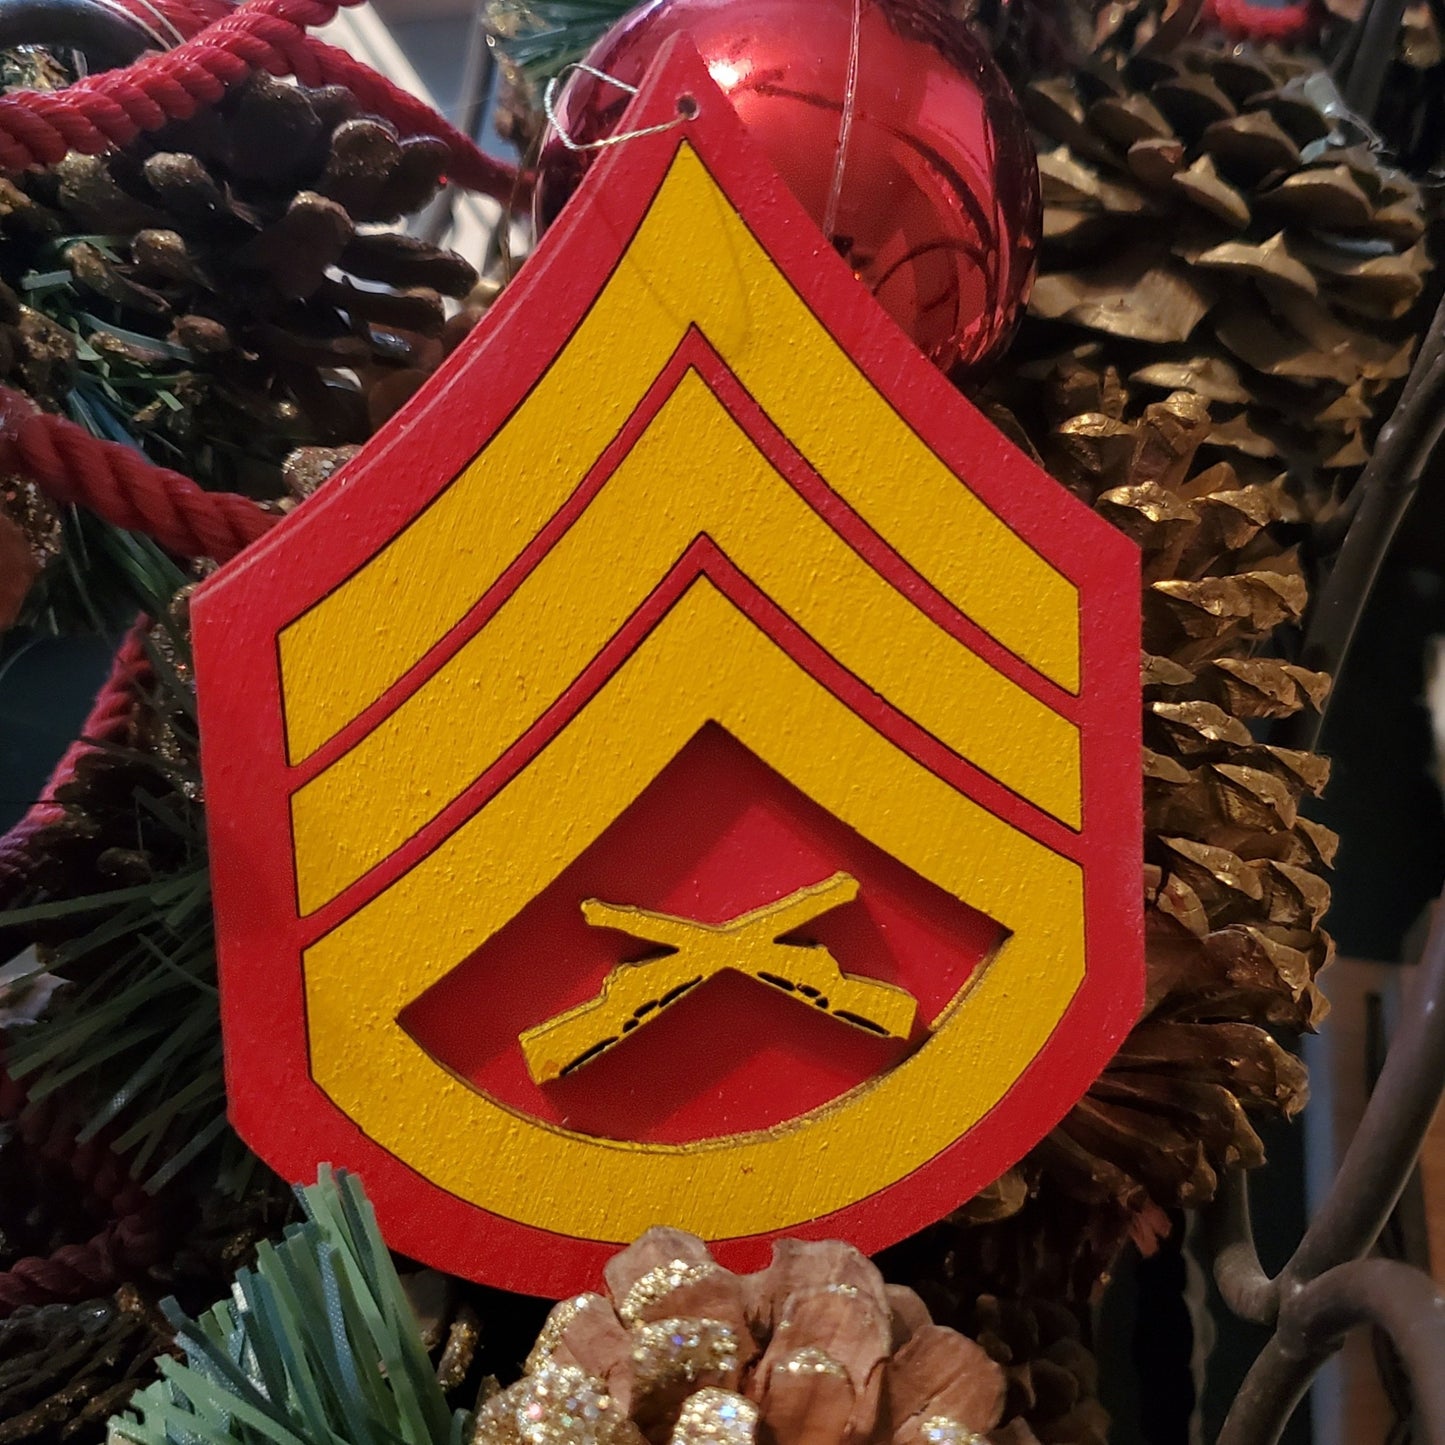 military gifts